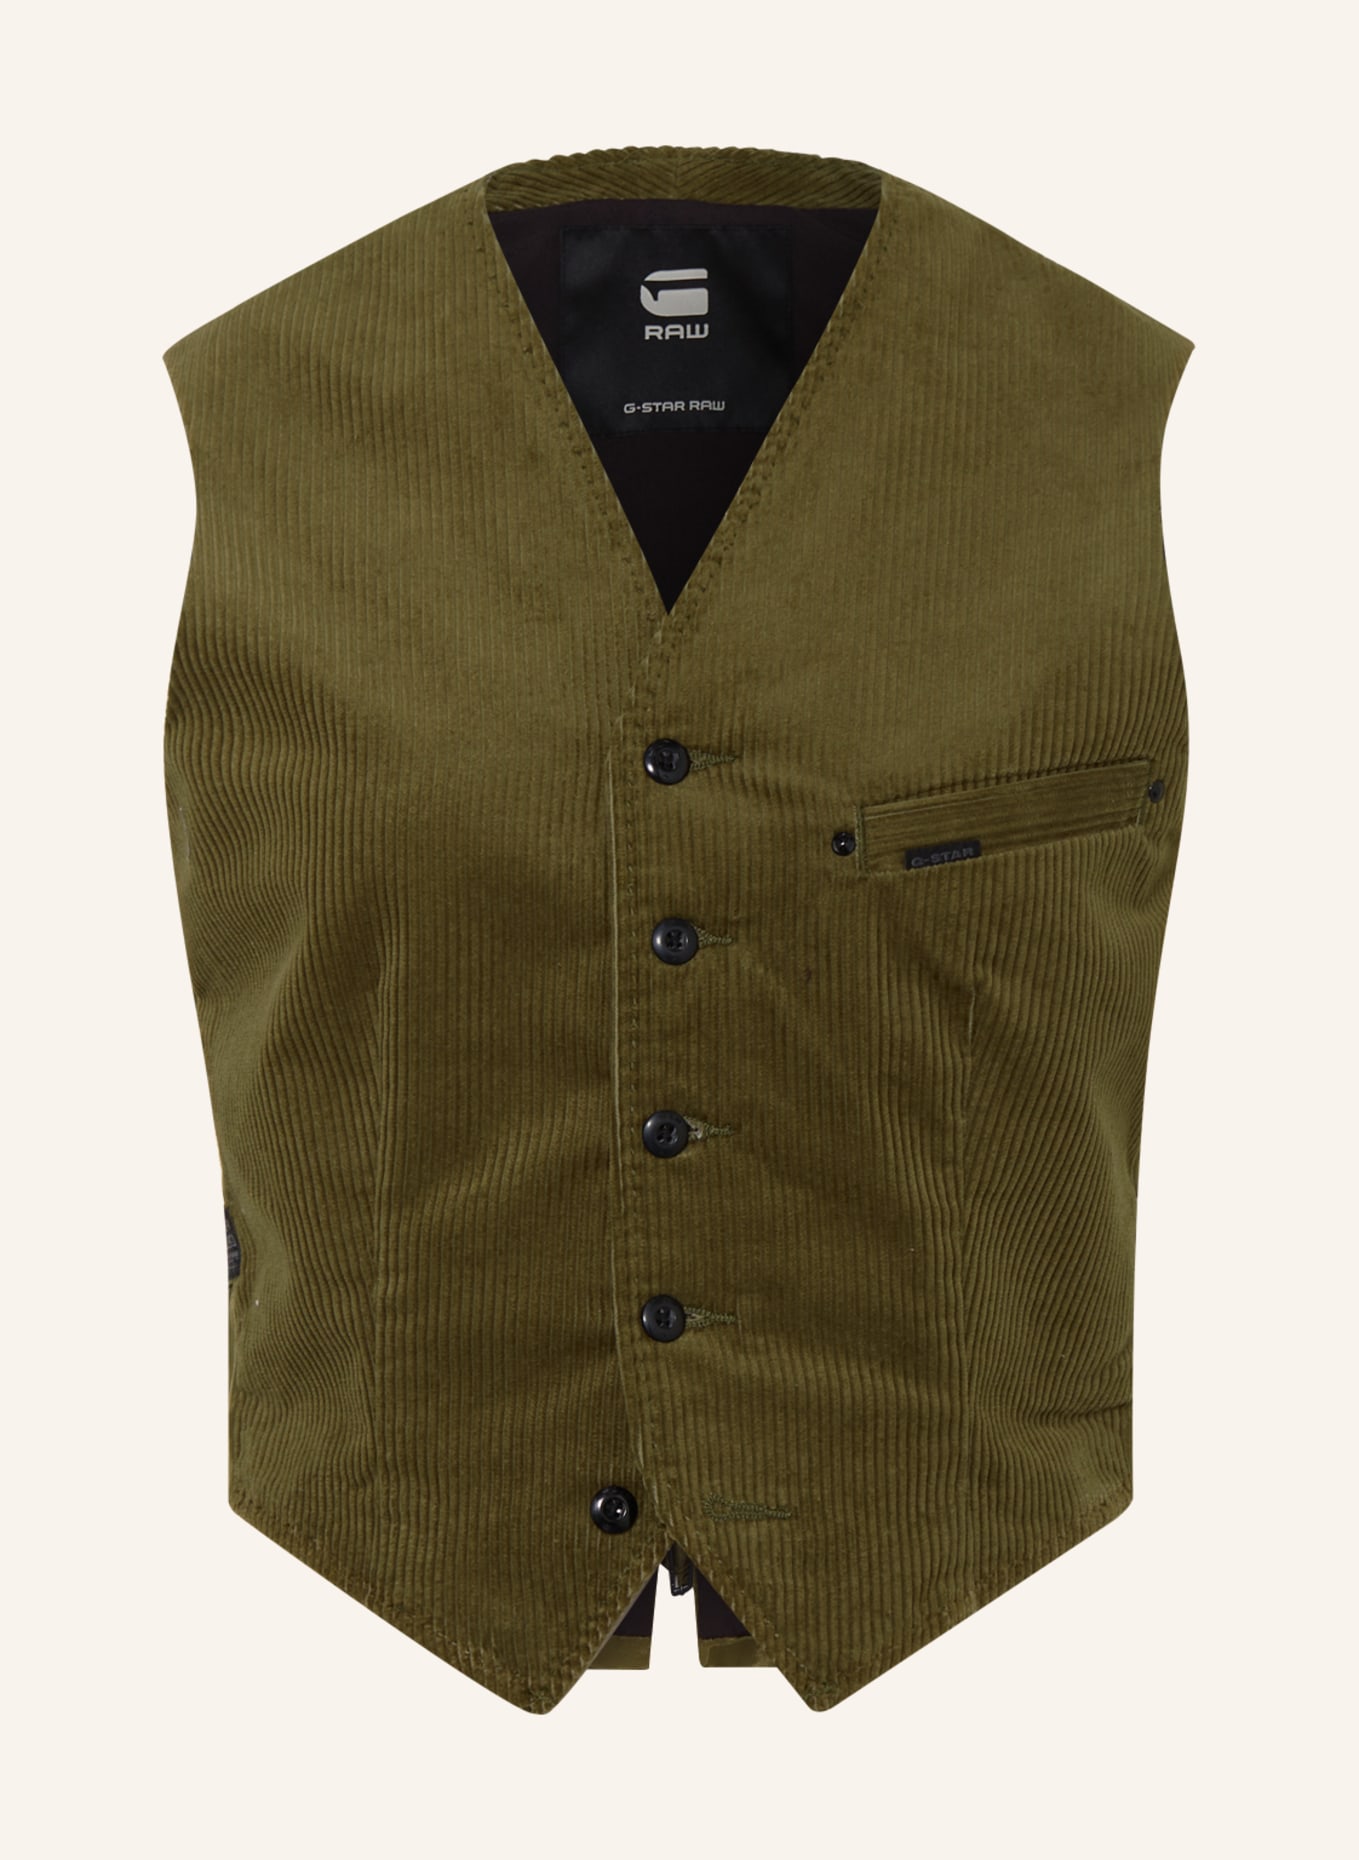 G-Star RAW Blazer vest in mixed materials, Color: OLIVE (Image 1)